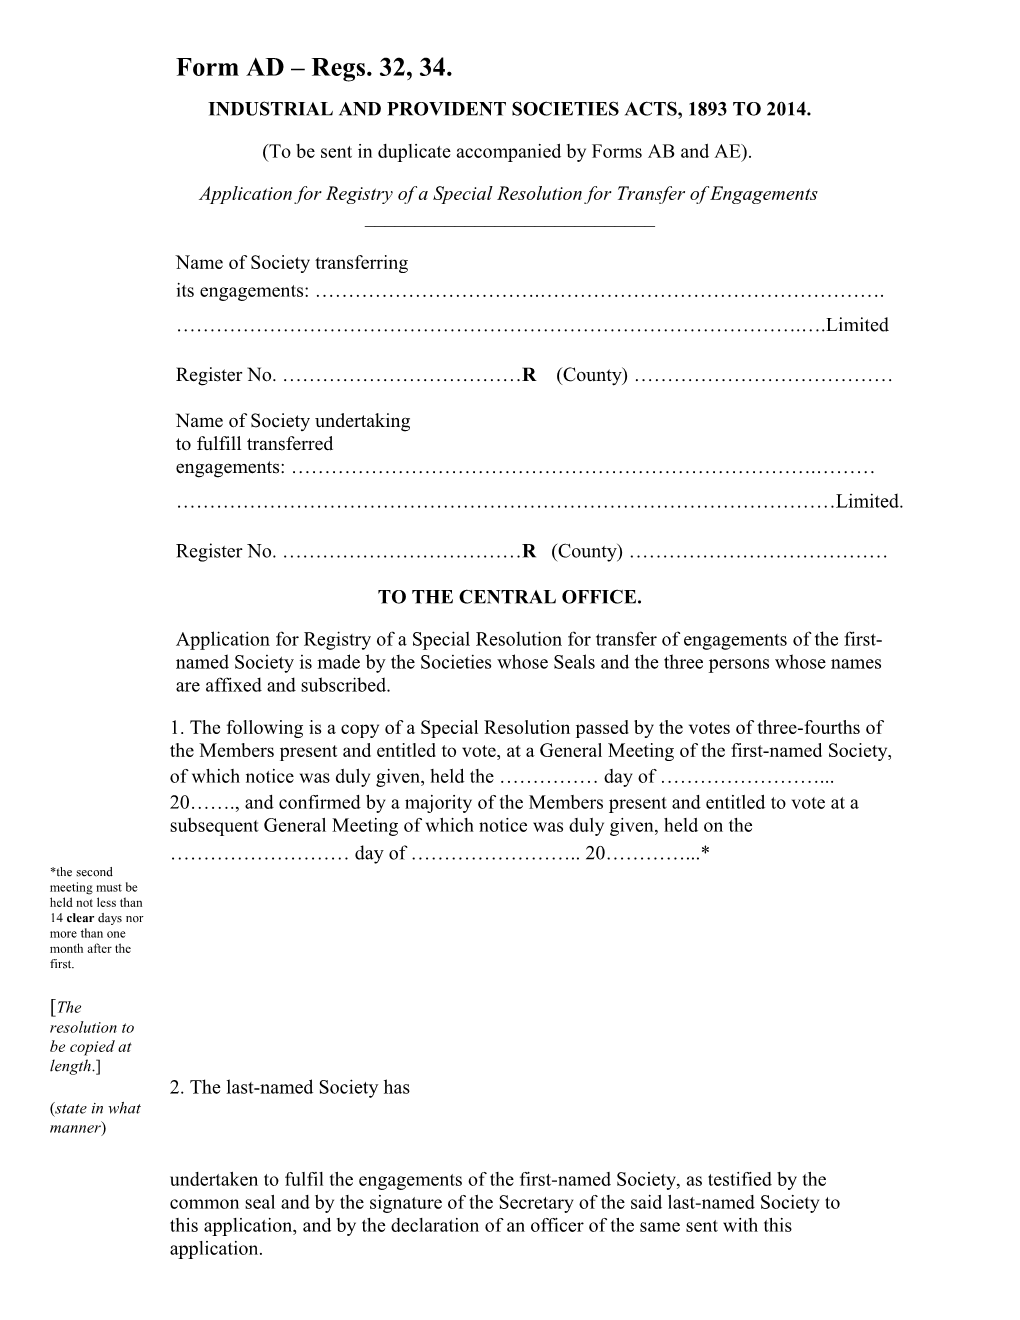 Form AD Application for Registry of a Special Resolution for Transfer of Engagements